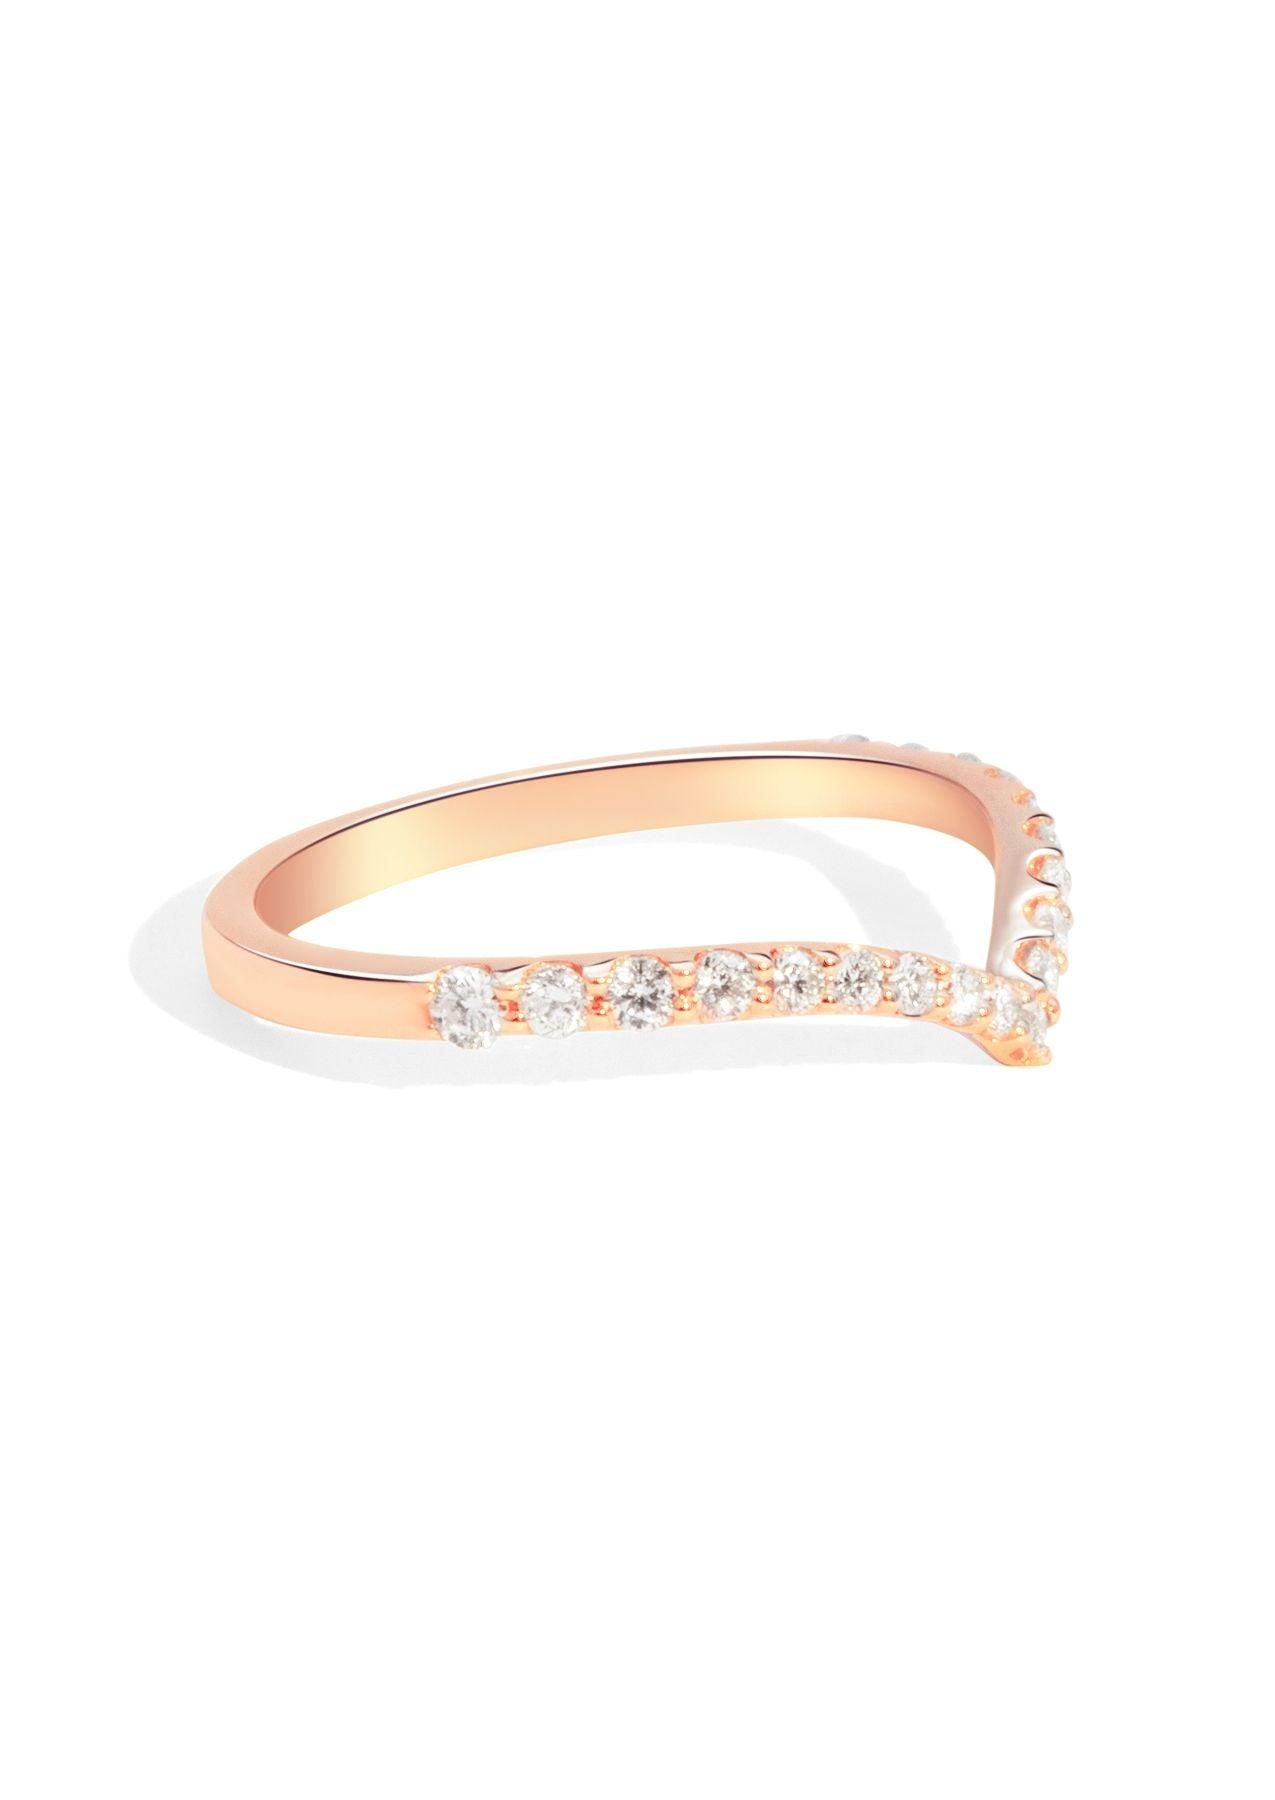 The Allude Rose Gold Diamond Band